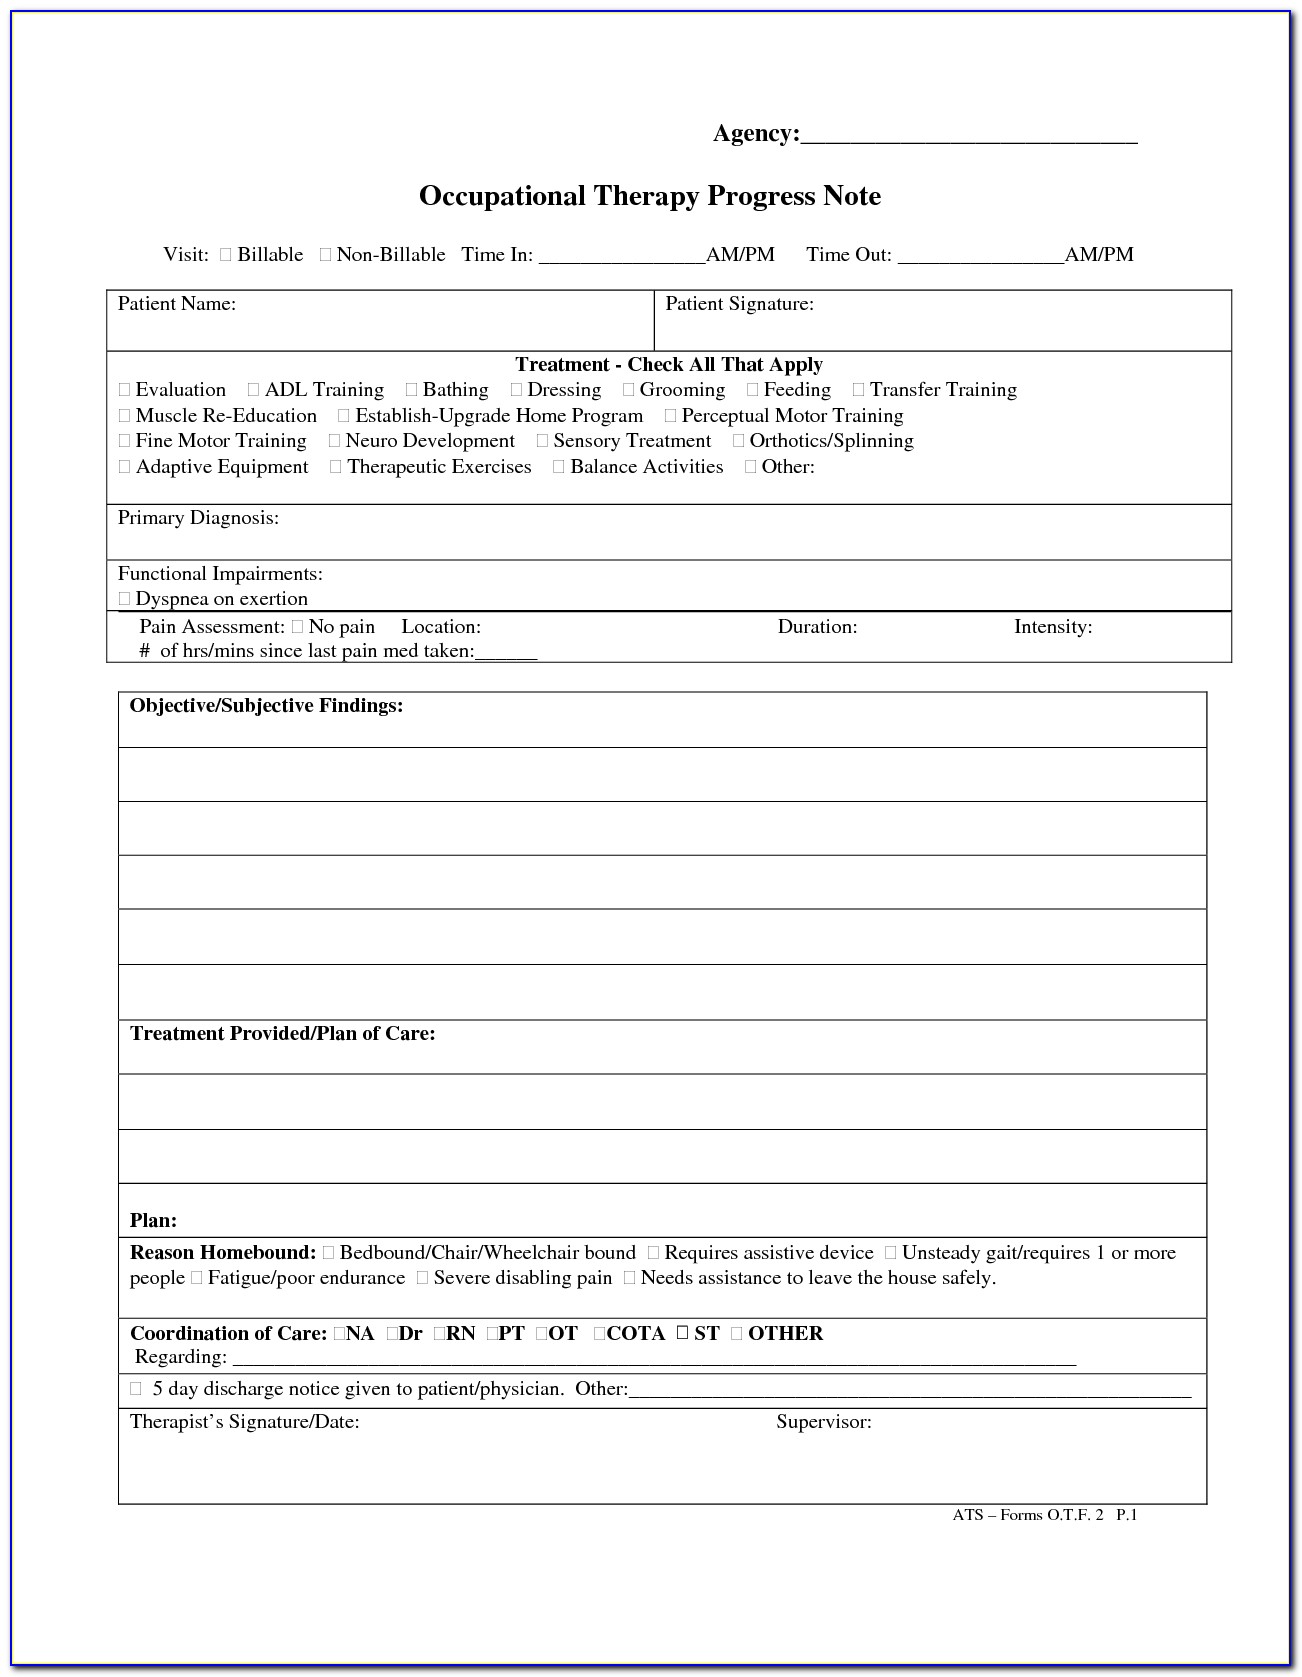 Occupational Therapy Progress Note Template